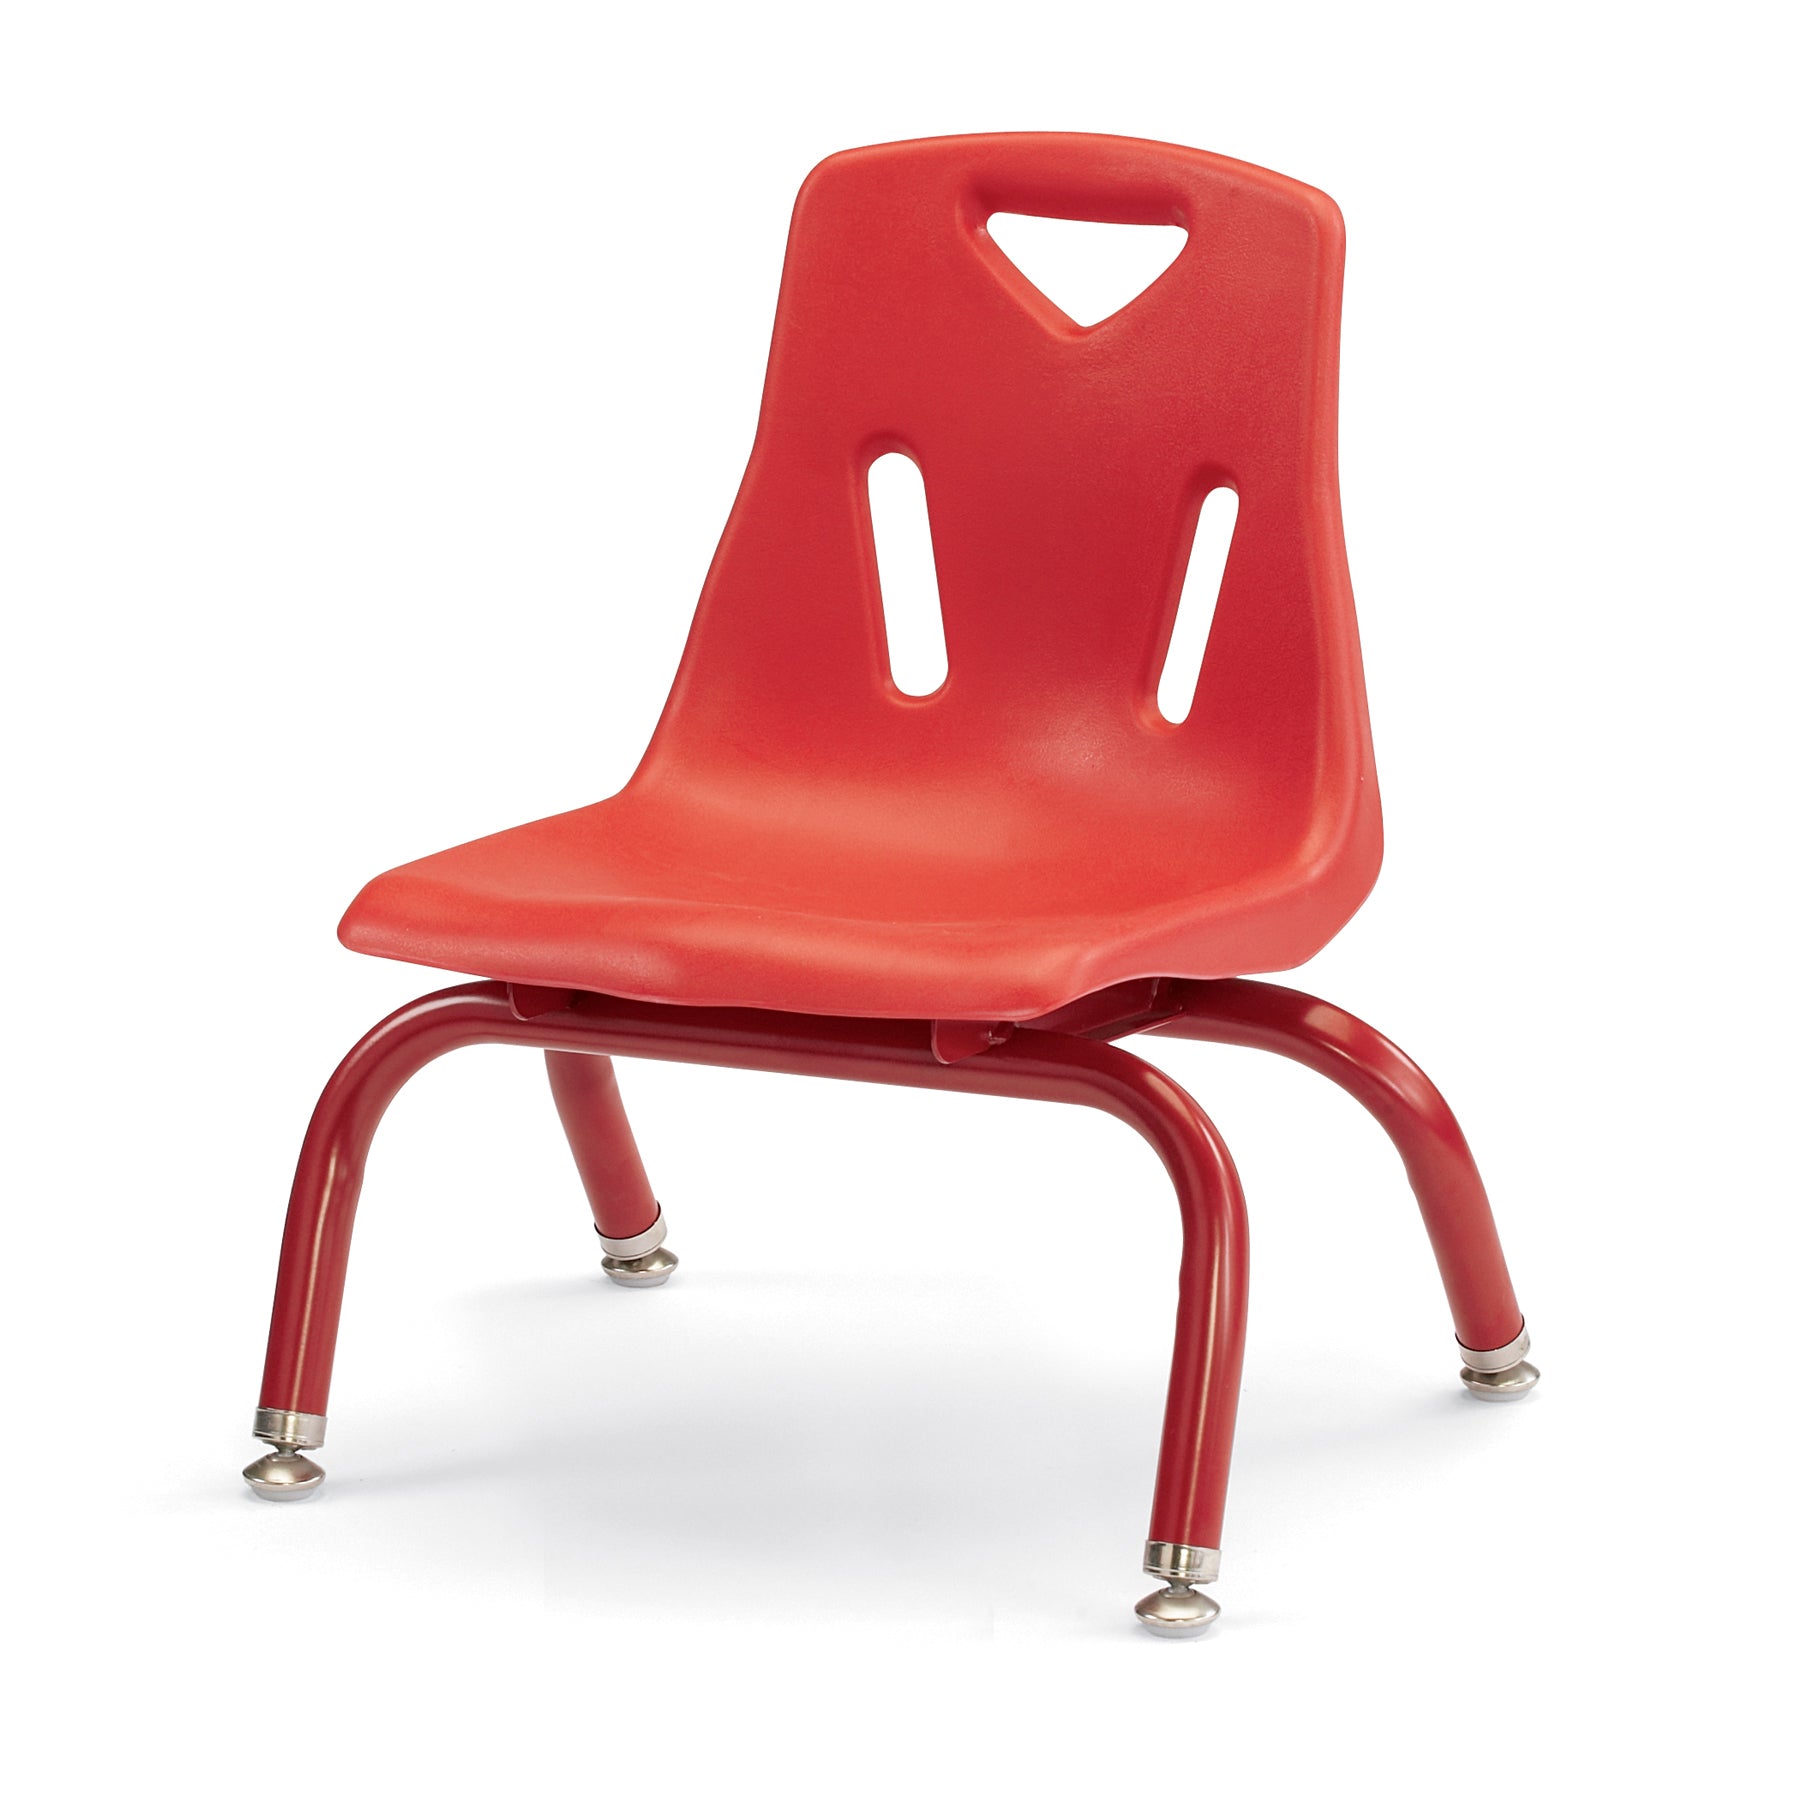 8118JC1008, Berries Stacking Chair with Powder-Coated Legs - 8" Ht - Red